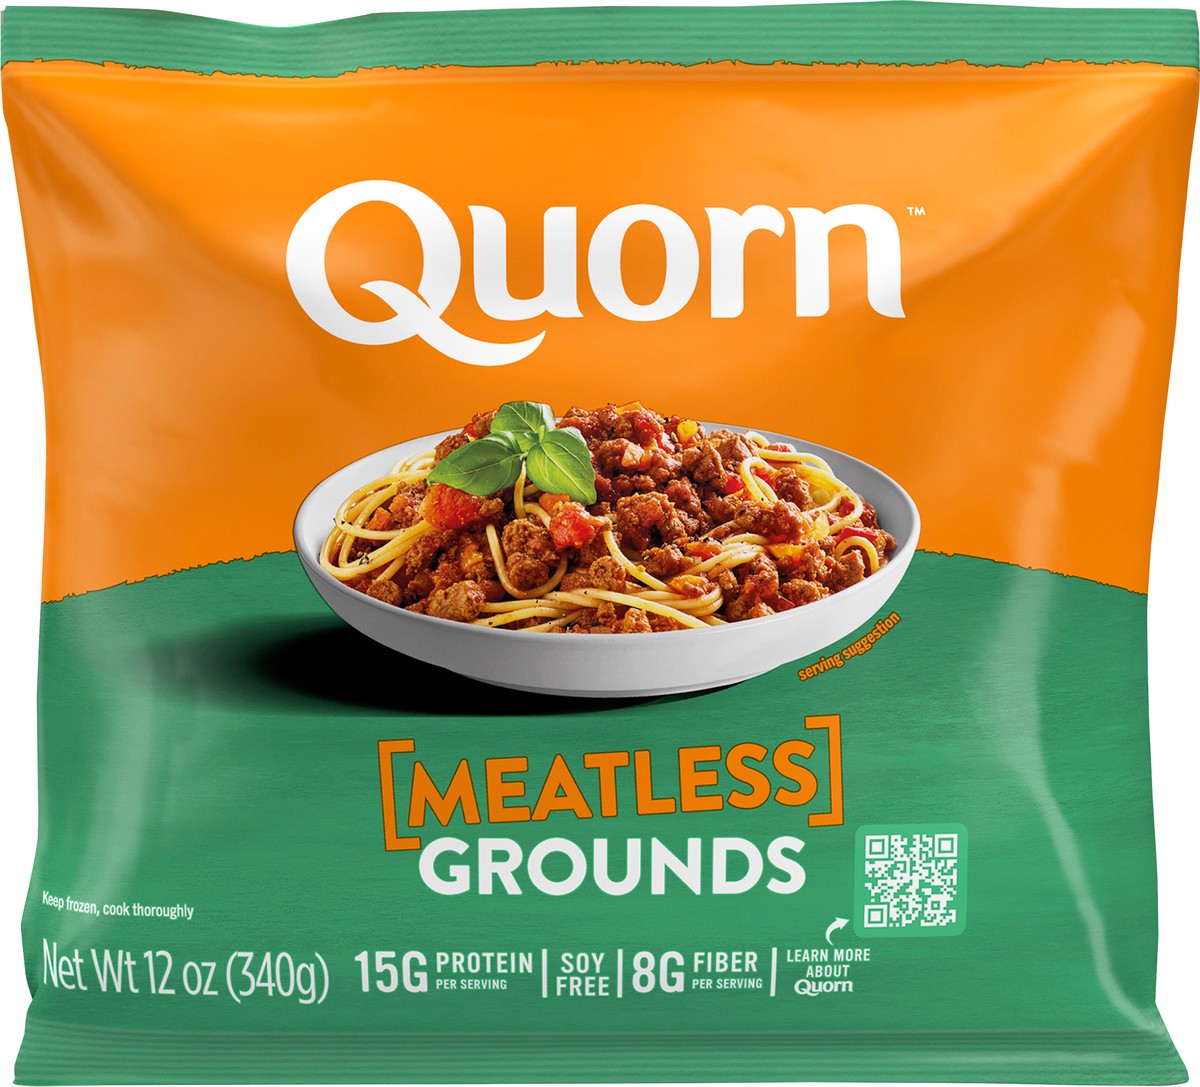 slide 8 of 8, Quorn Meatless Grounds, 12 oz